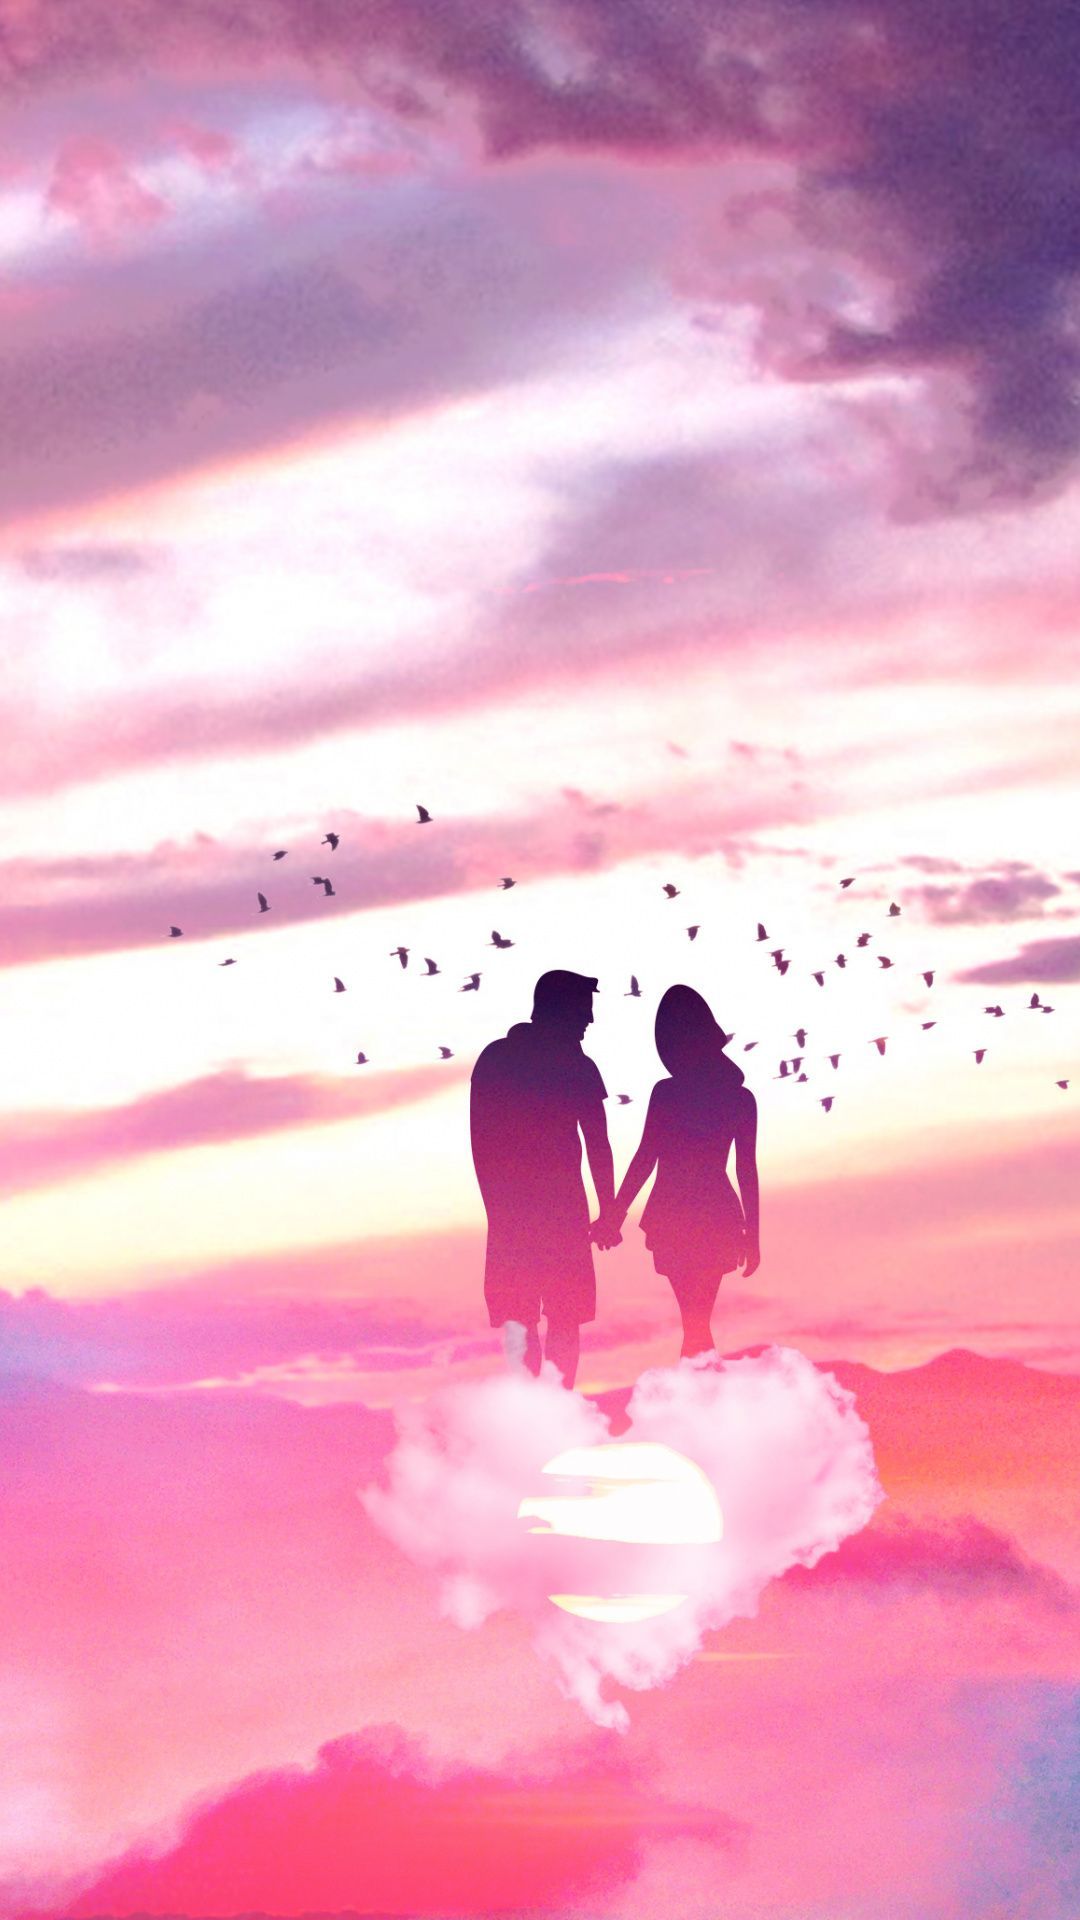 Couple, love, sky, clouds, fantasy wallpaper. Wallpaper, Cool background, Uhd wallpaper